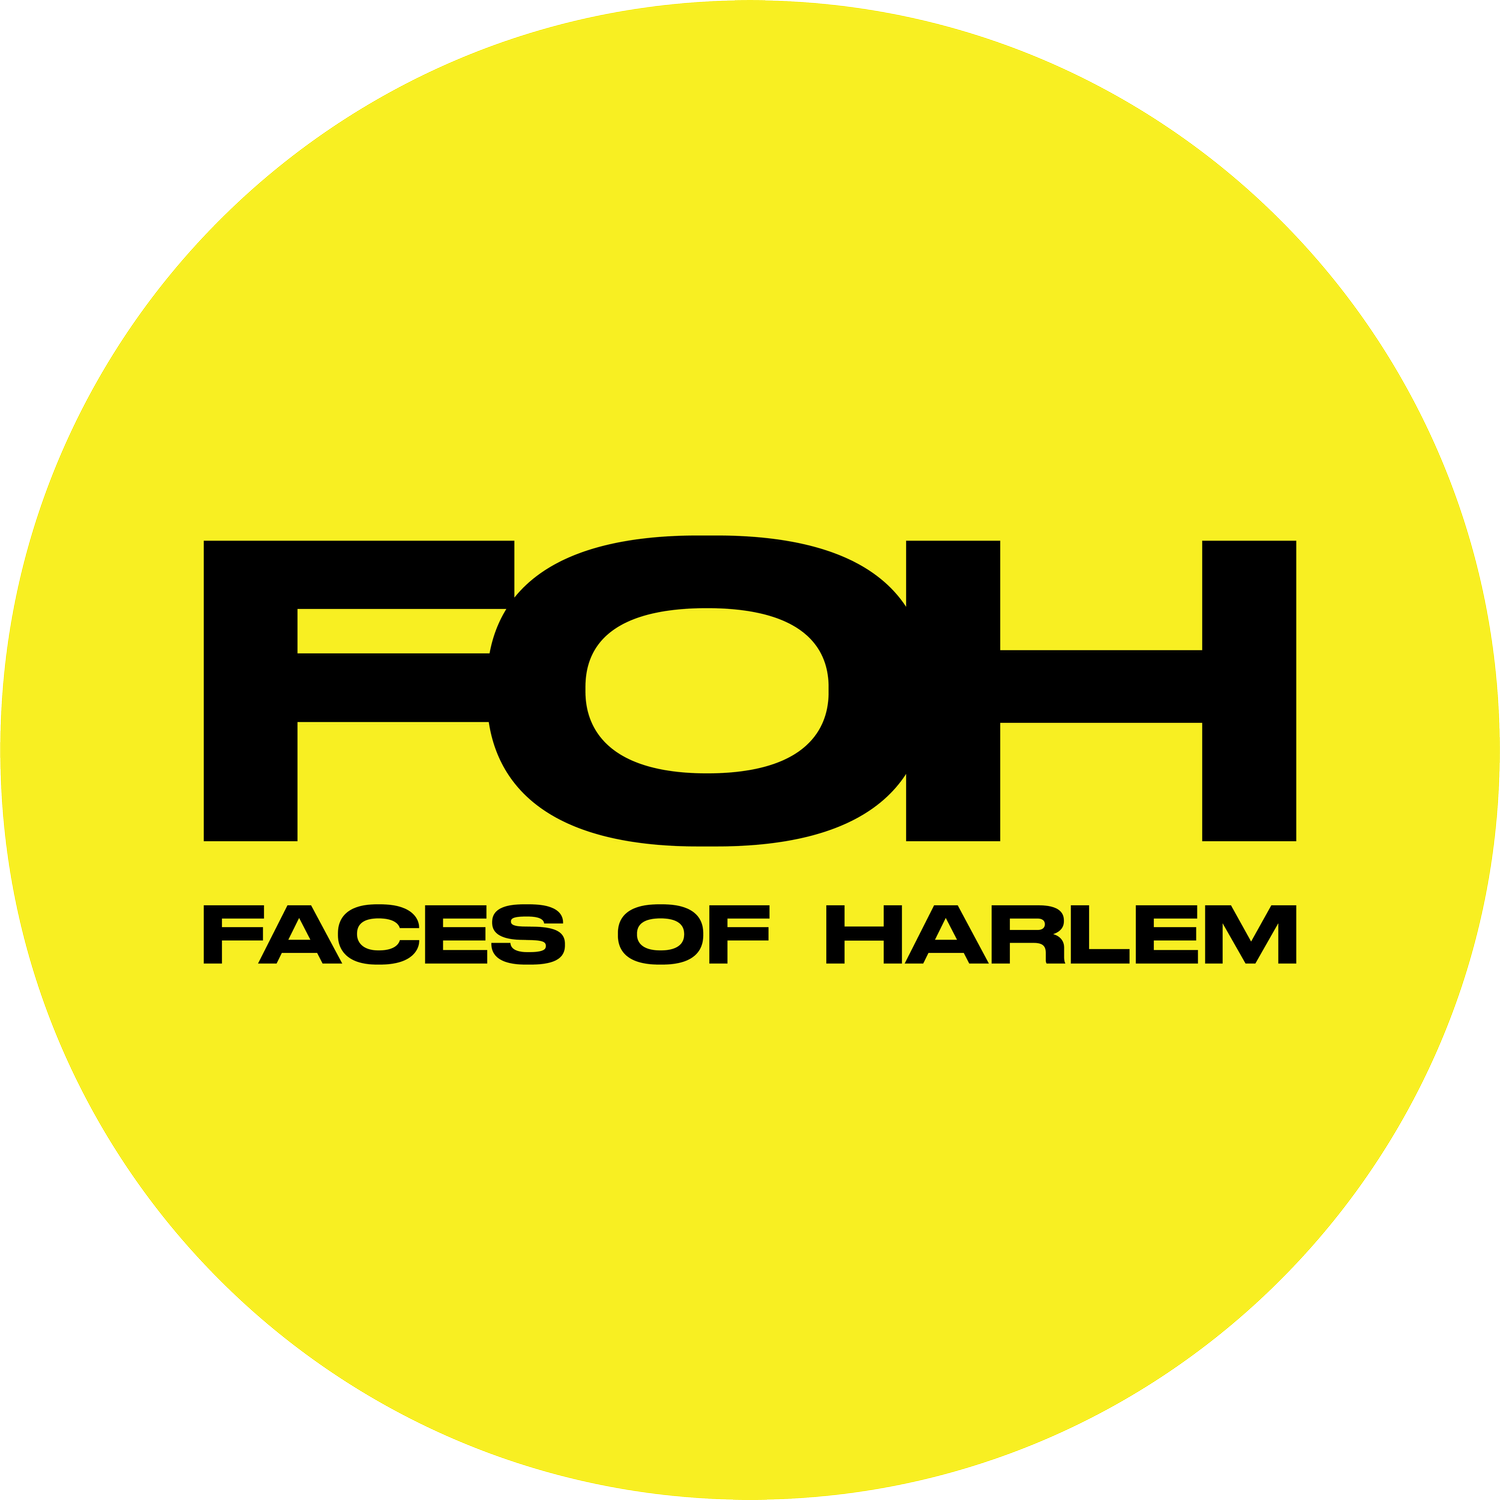 FACES OF HARLEM